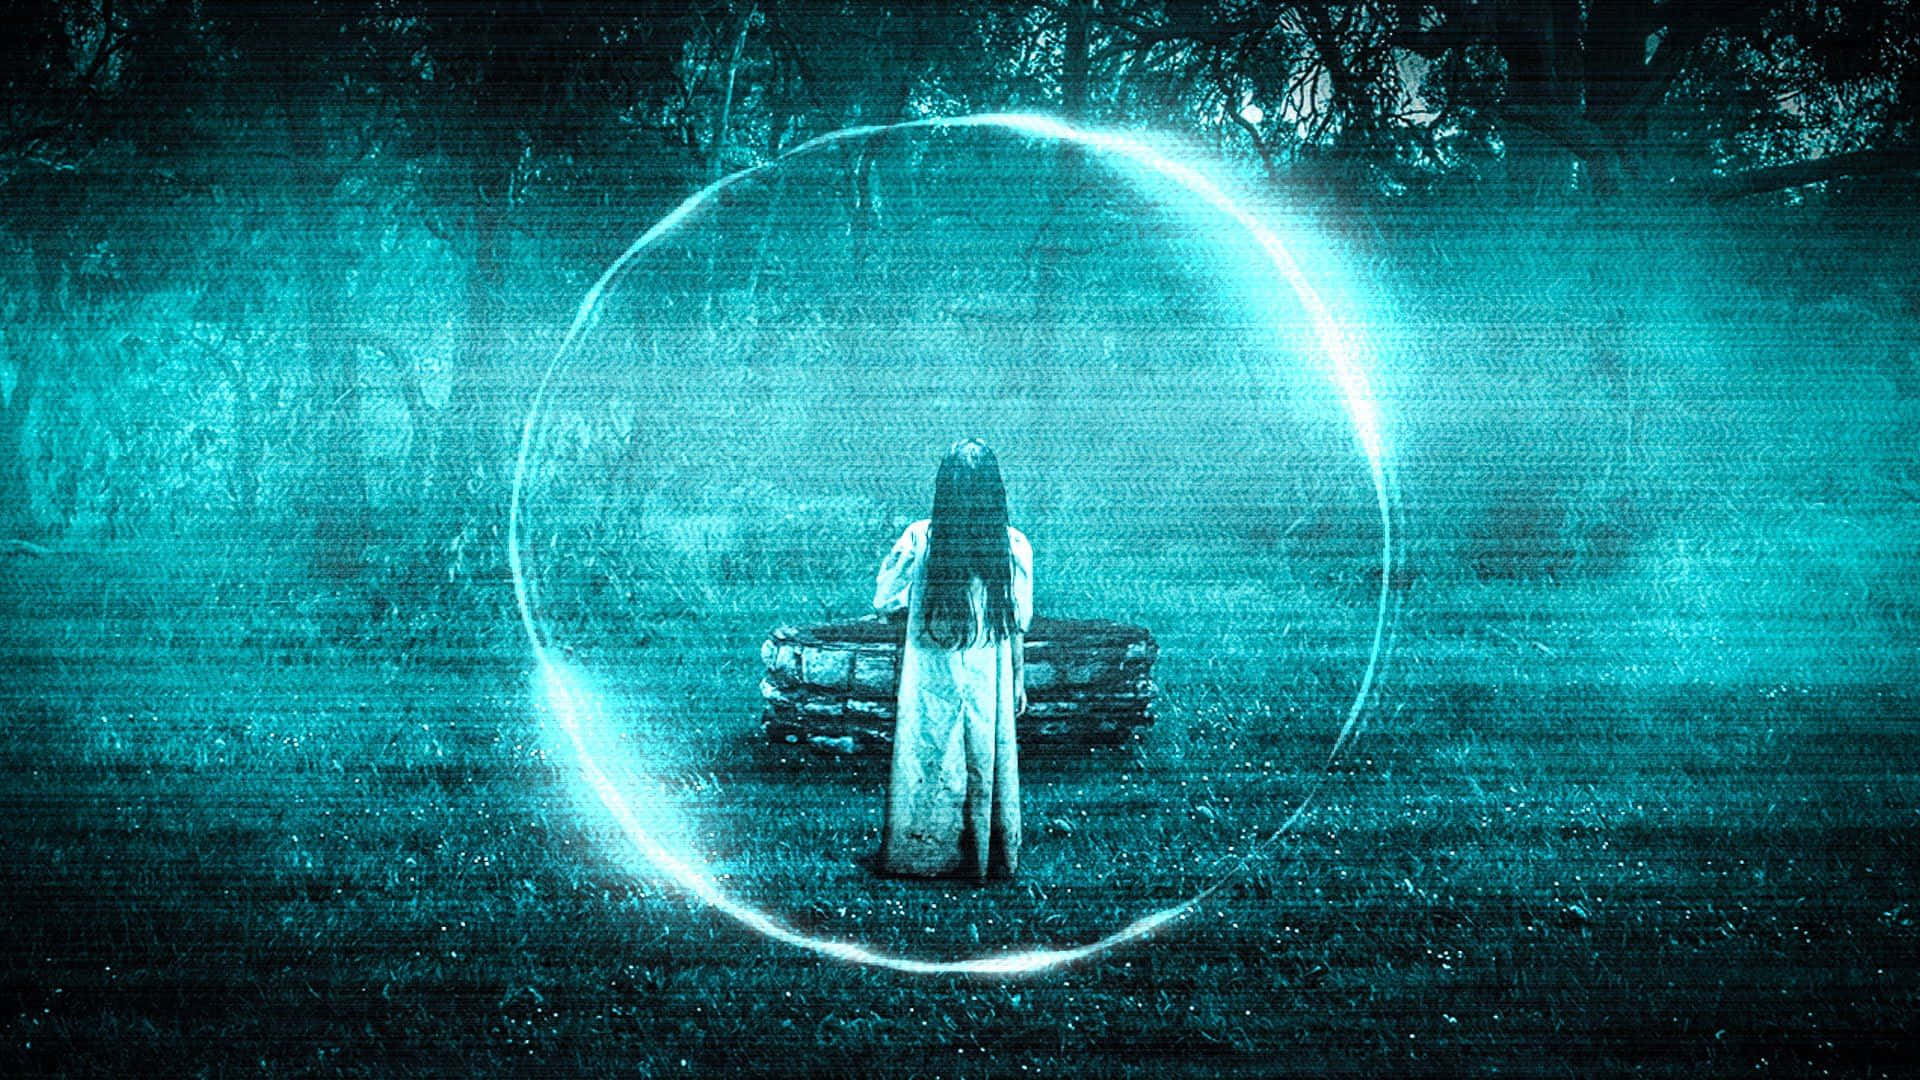 the ring movie wallpaper